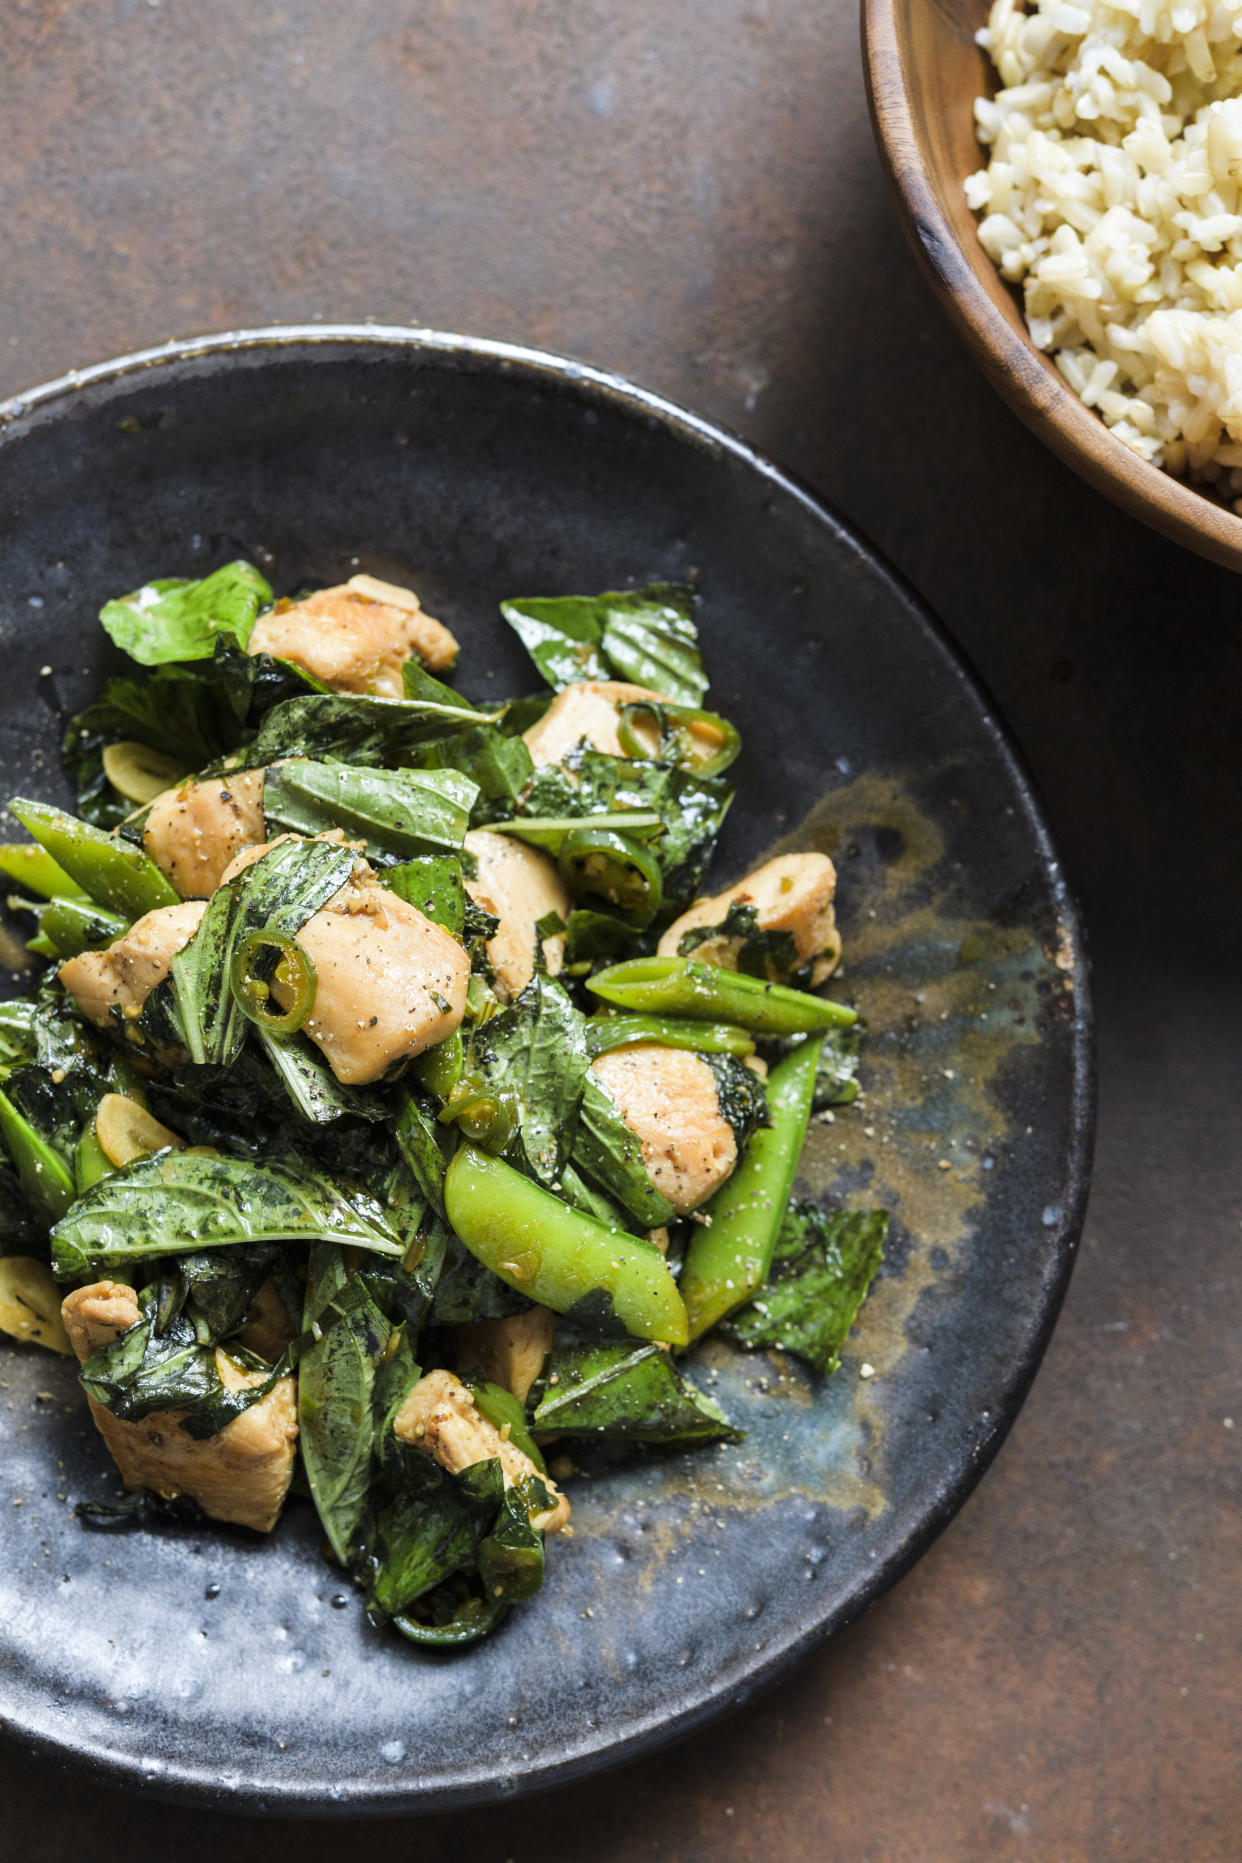 This image released by Milk Street shows a recipe for Stir-Fried Chicken w/Snap Peas & Basil. (Milk Street via AP)